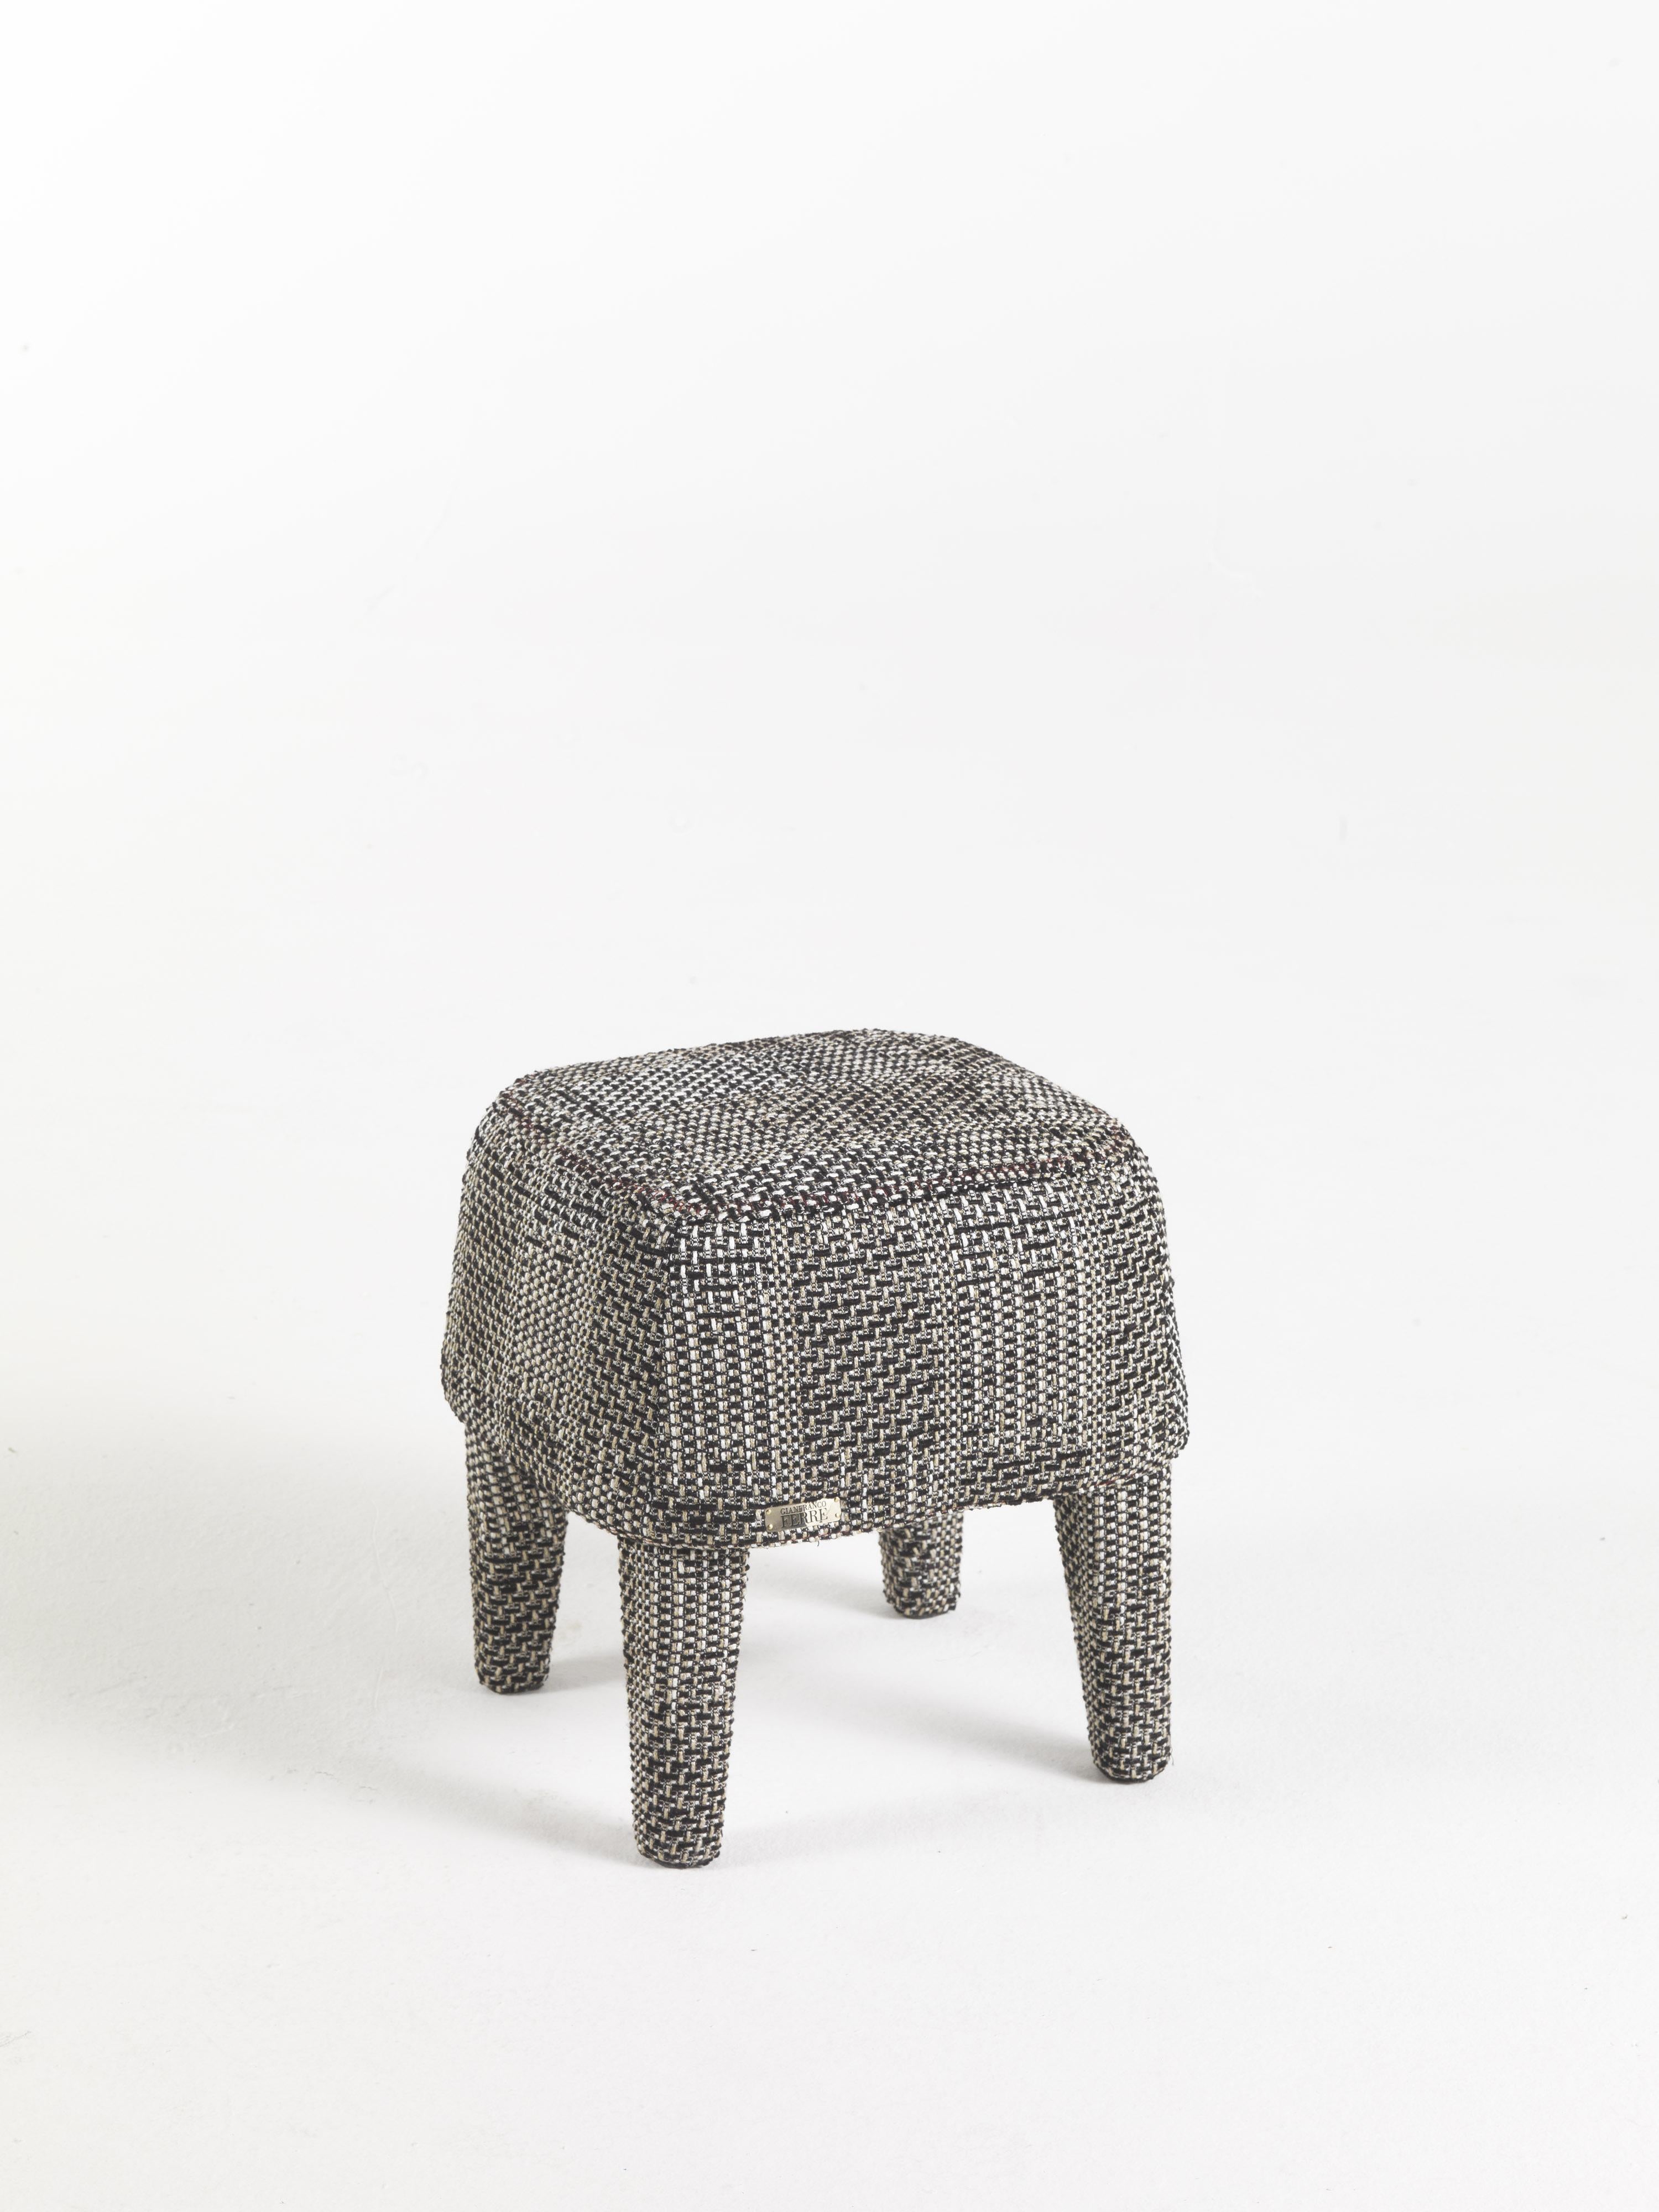 The mini pouf features a light and versatile design. Small, soft and compact, it adds character to any setting. Available in different menswear fabrics of the collection: pied-de-poule, pinstripe, twill, Prince of Wales.
Mini pouf with the structure